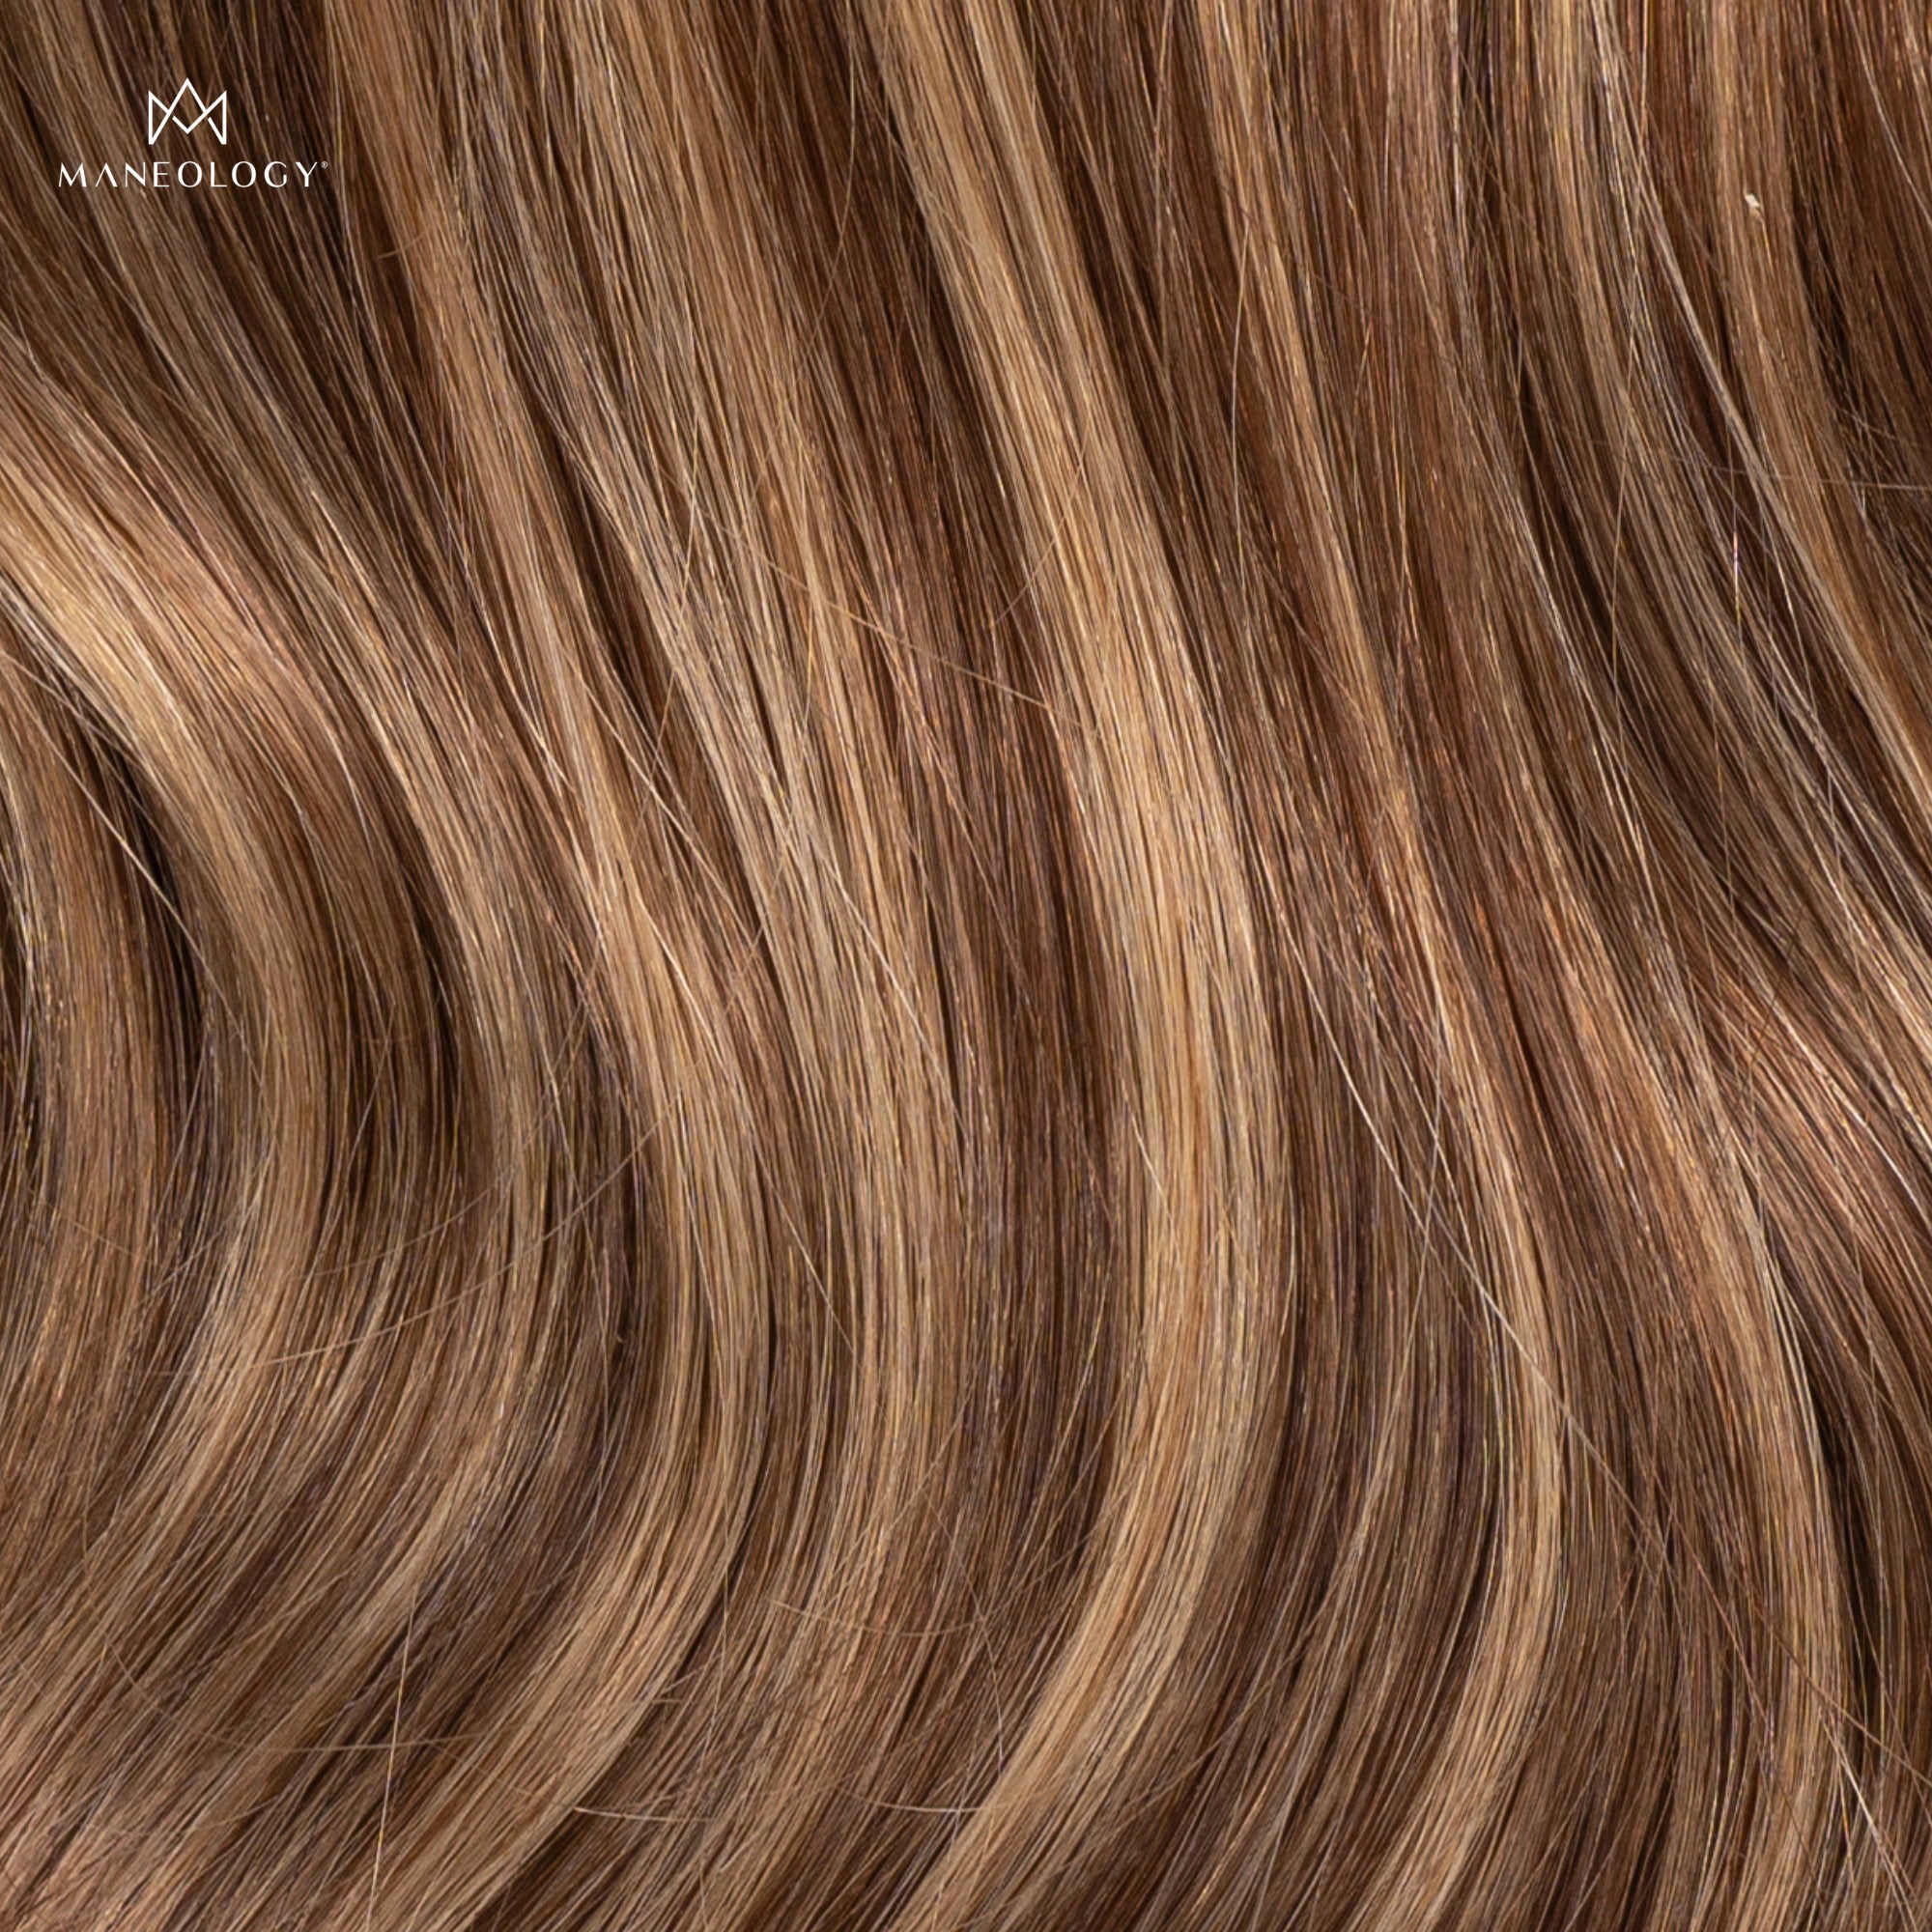 Copy of Duchess Elegant Clip-in Hair Extensions 20" Colour P6 27 Brown & Caramel - Maneology Hair Extensions